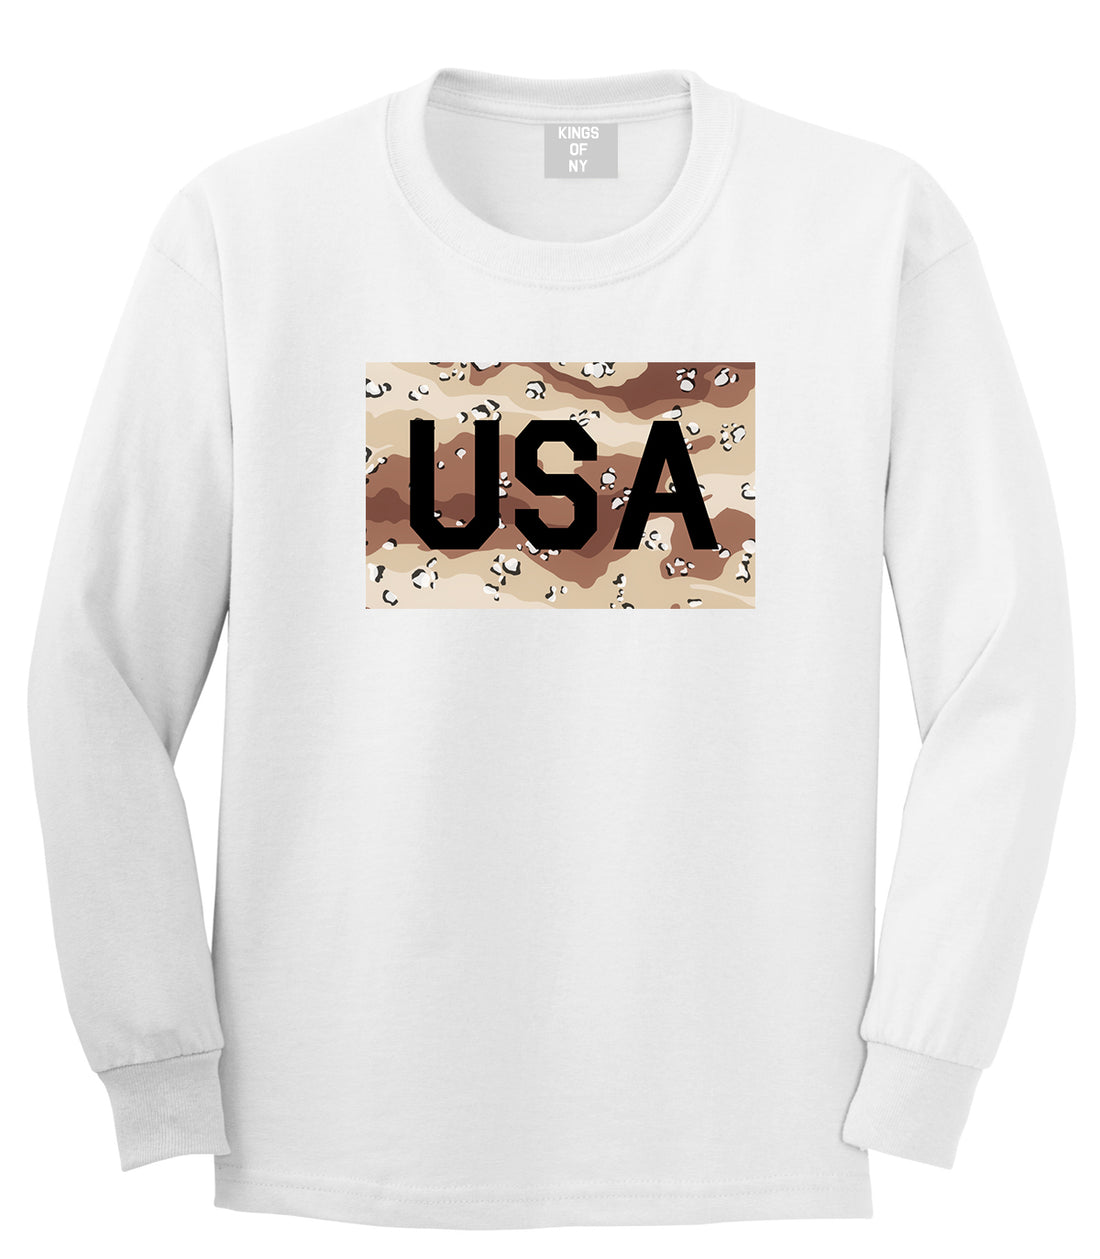 USA Desert Camo Army Mens White Long Sleeve T-Shirt by Kings Of NY